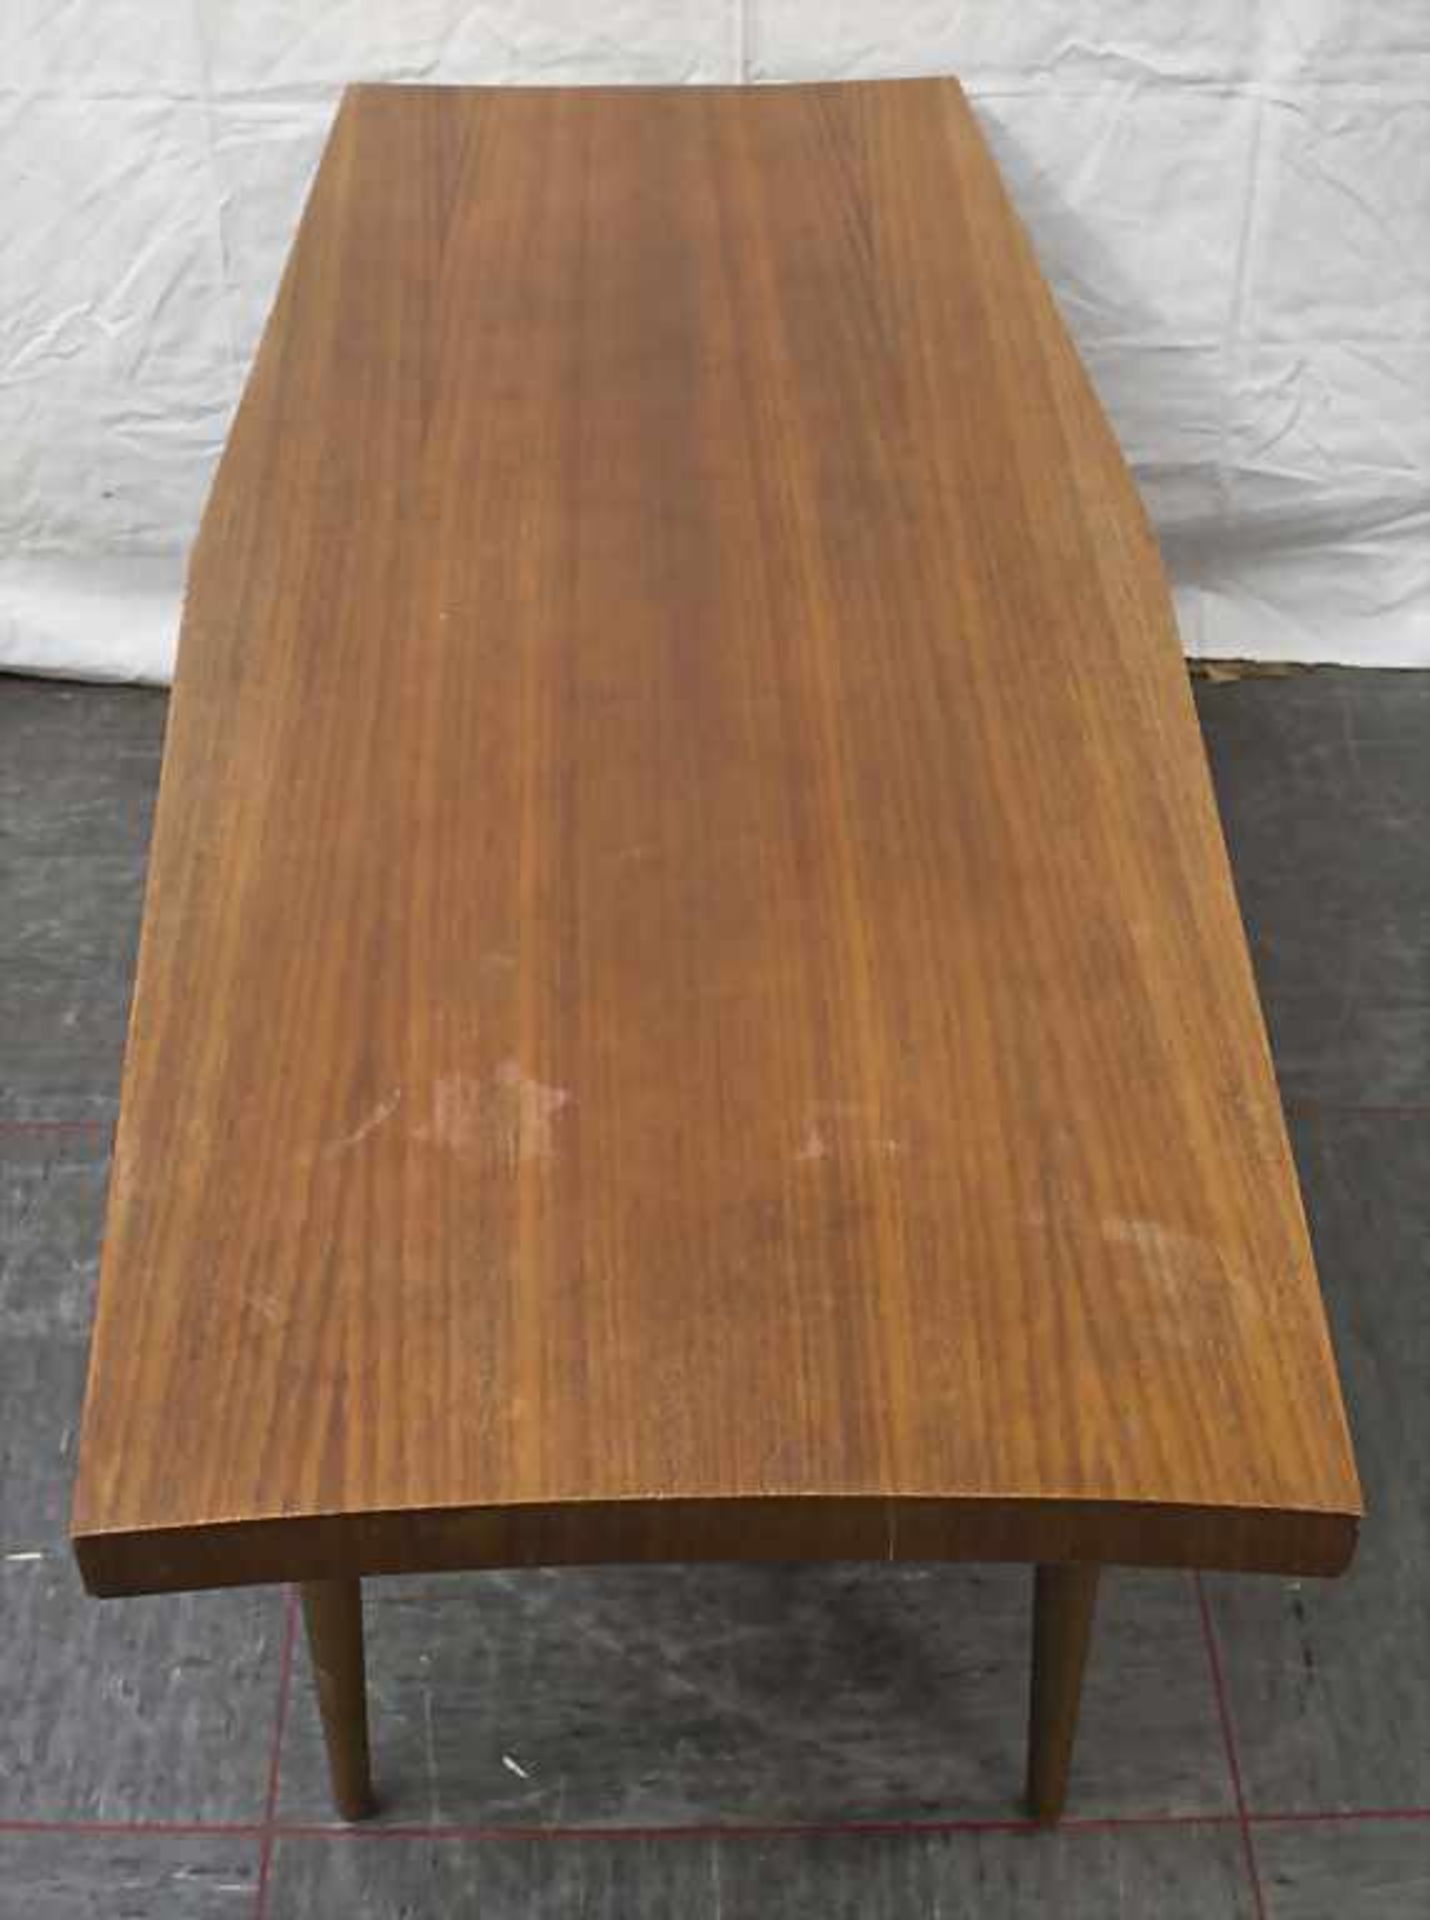 Couchtisch / A coffee table, 1960er JahreMaterial: Holz, Maße: H. 50 cm, L. 119 cm, T. 50 cm,